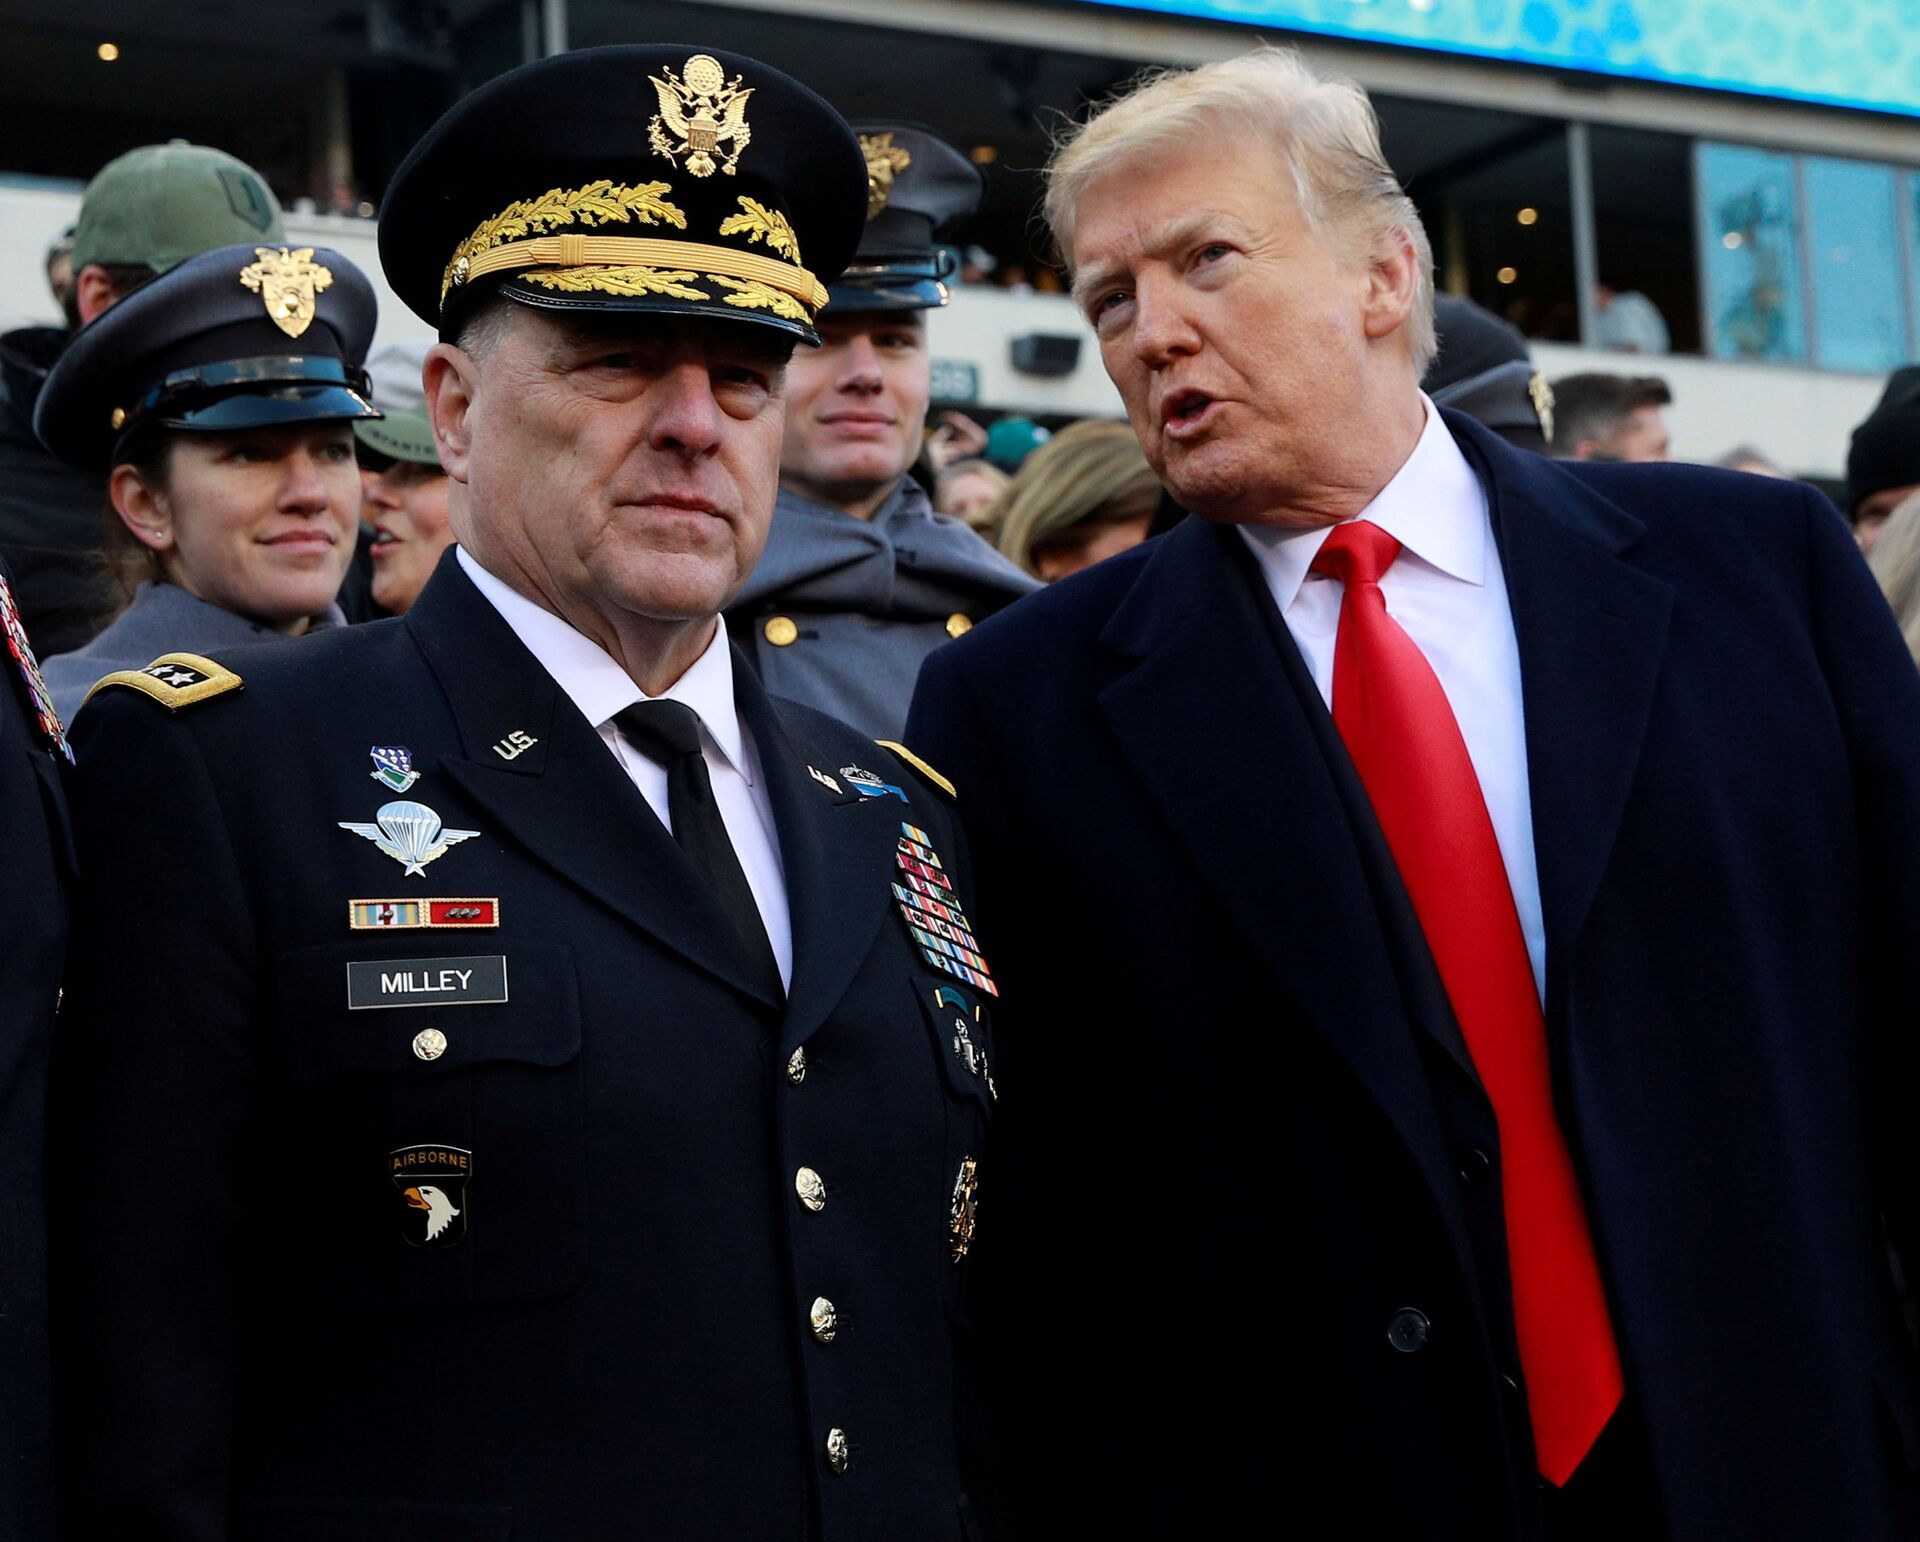  U.S. President Donald Trump and Gen. Mark Milley, Chief of Staff of the United States Army, speak at the 119th Army-Navy football game at Lincoln Financial Field in Philadelphia, Pennsylvania, U.S. December 8, 2018 - Sputnik International, 1920, 07.09.2021